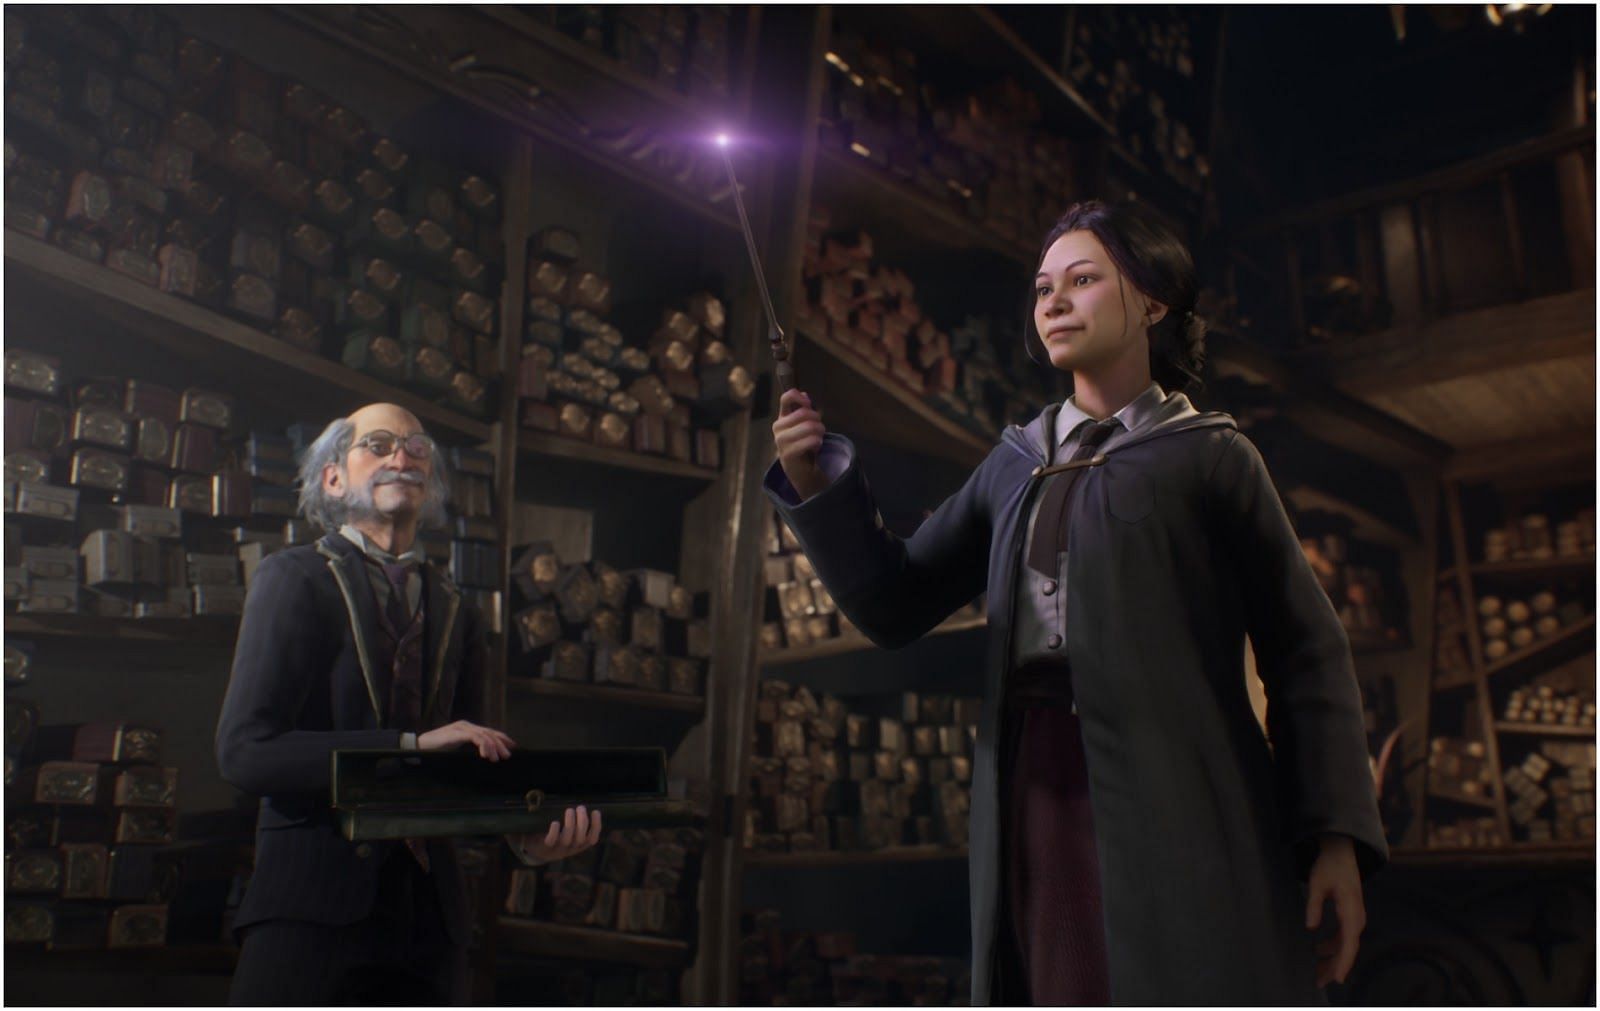 Hogwart Legacy might get a trailer next month (Image by Warner Brothers)